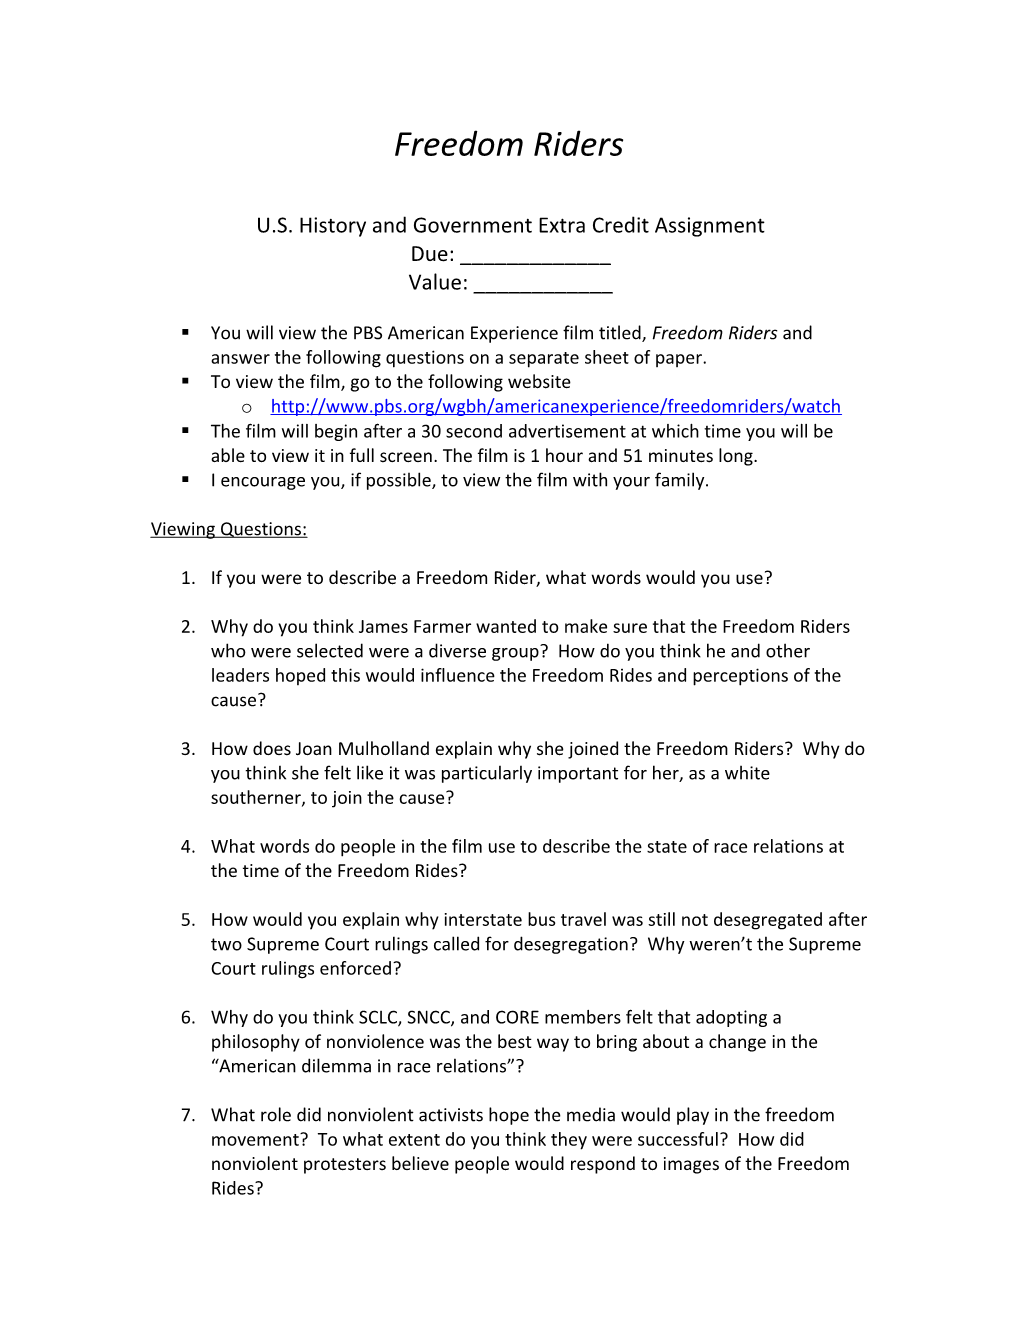 U.S. History and Government Extra Credit Assignment